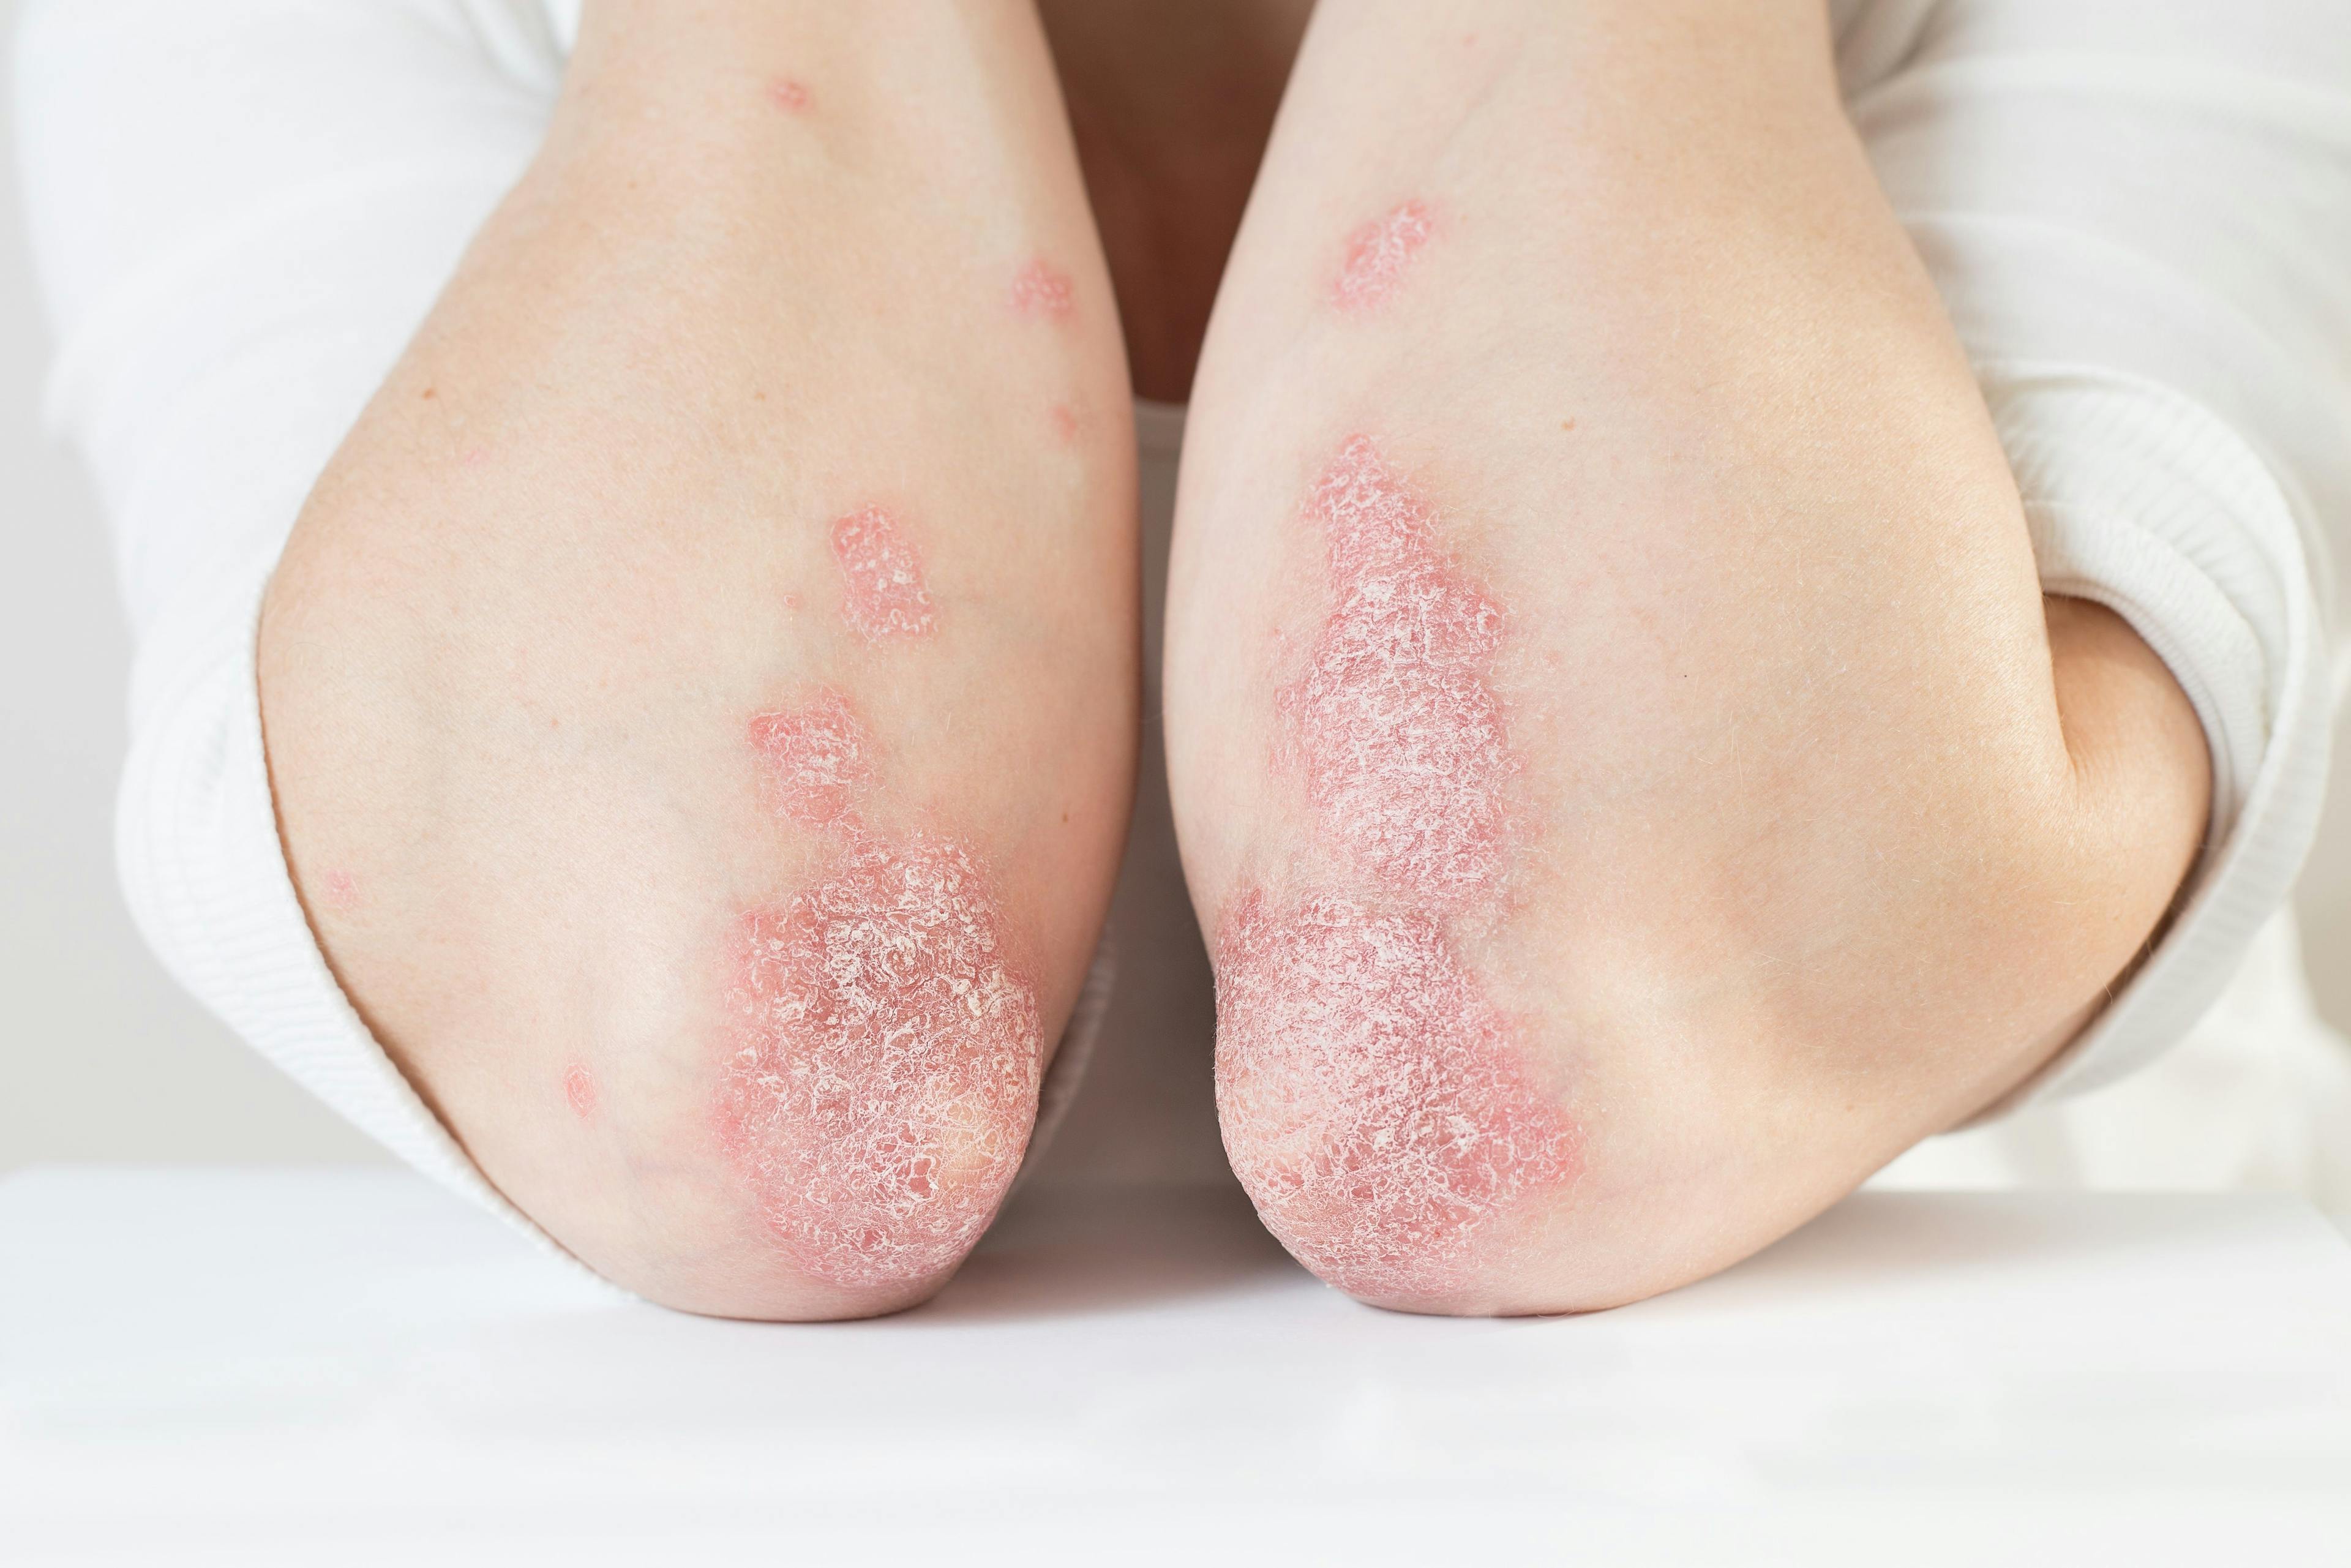 Risankizumab Significantly Reduces Severity of Plaque Psoriasis Compared to Apremilast